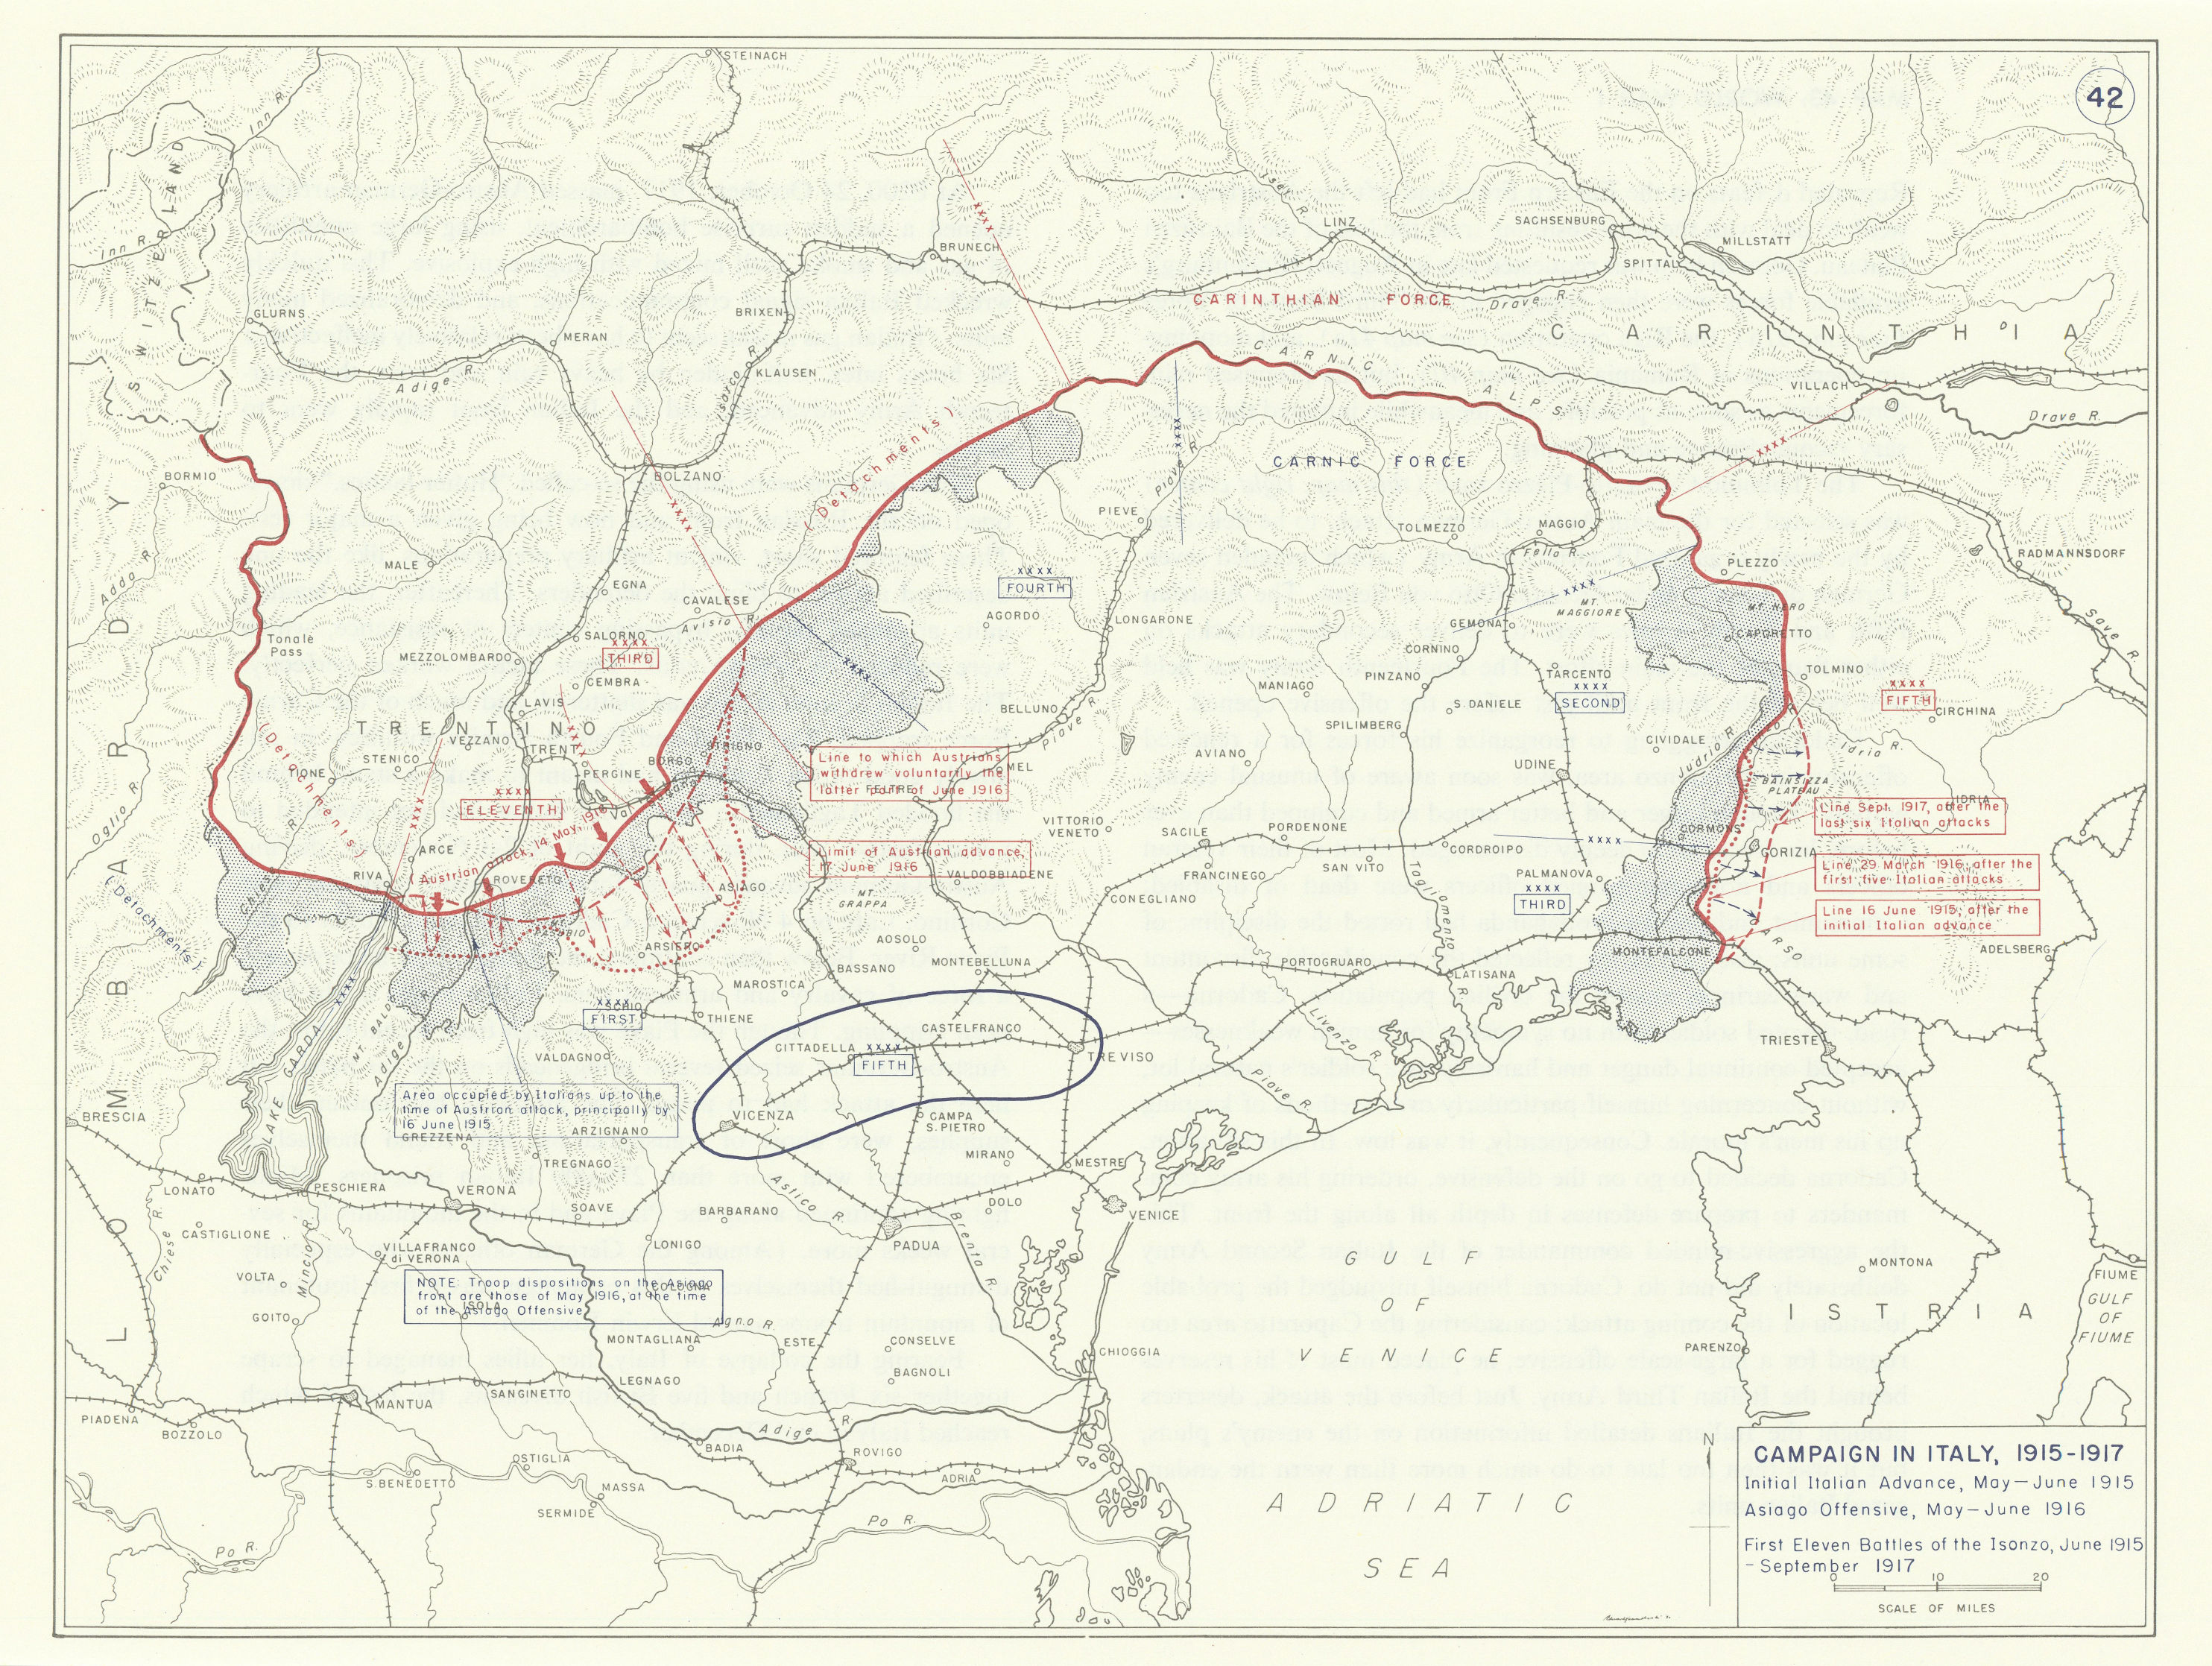 World War 1. Italy Campaign 1915-1917. Asiago Offensive. Isonzo battles 1959 map